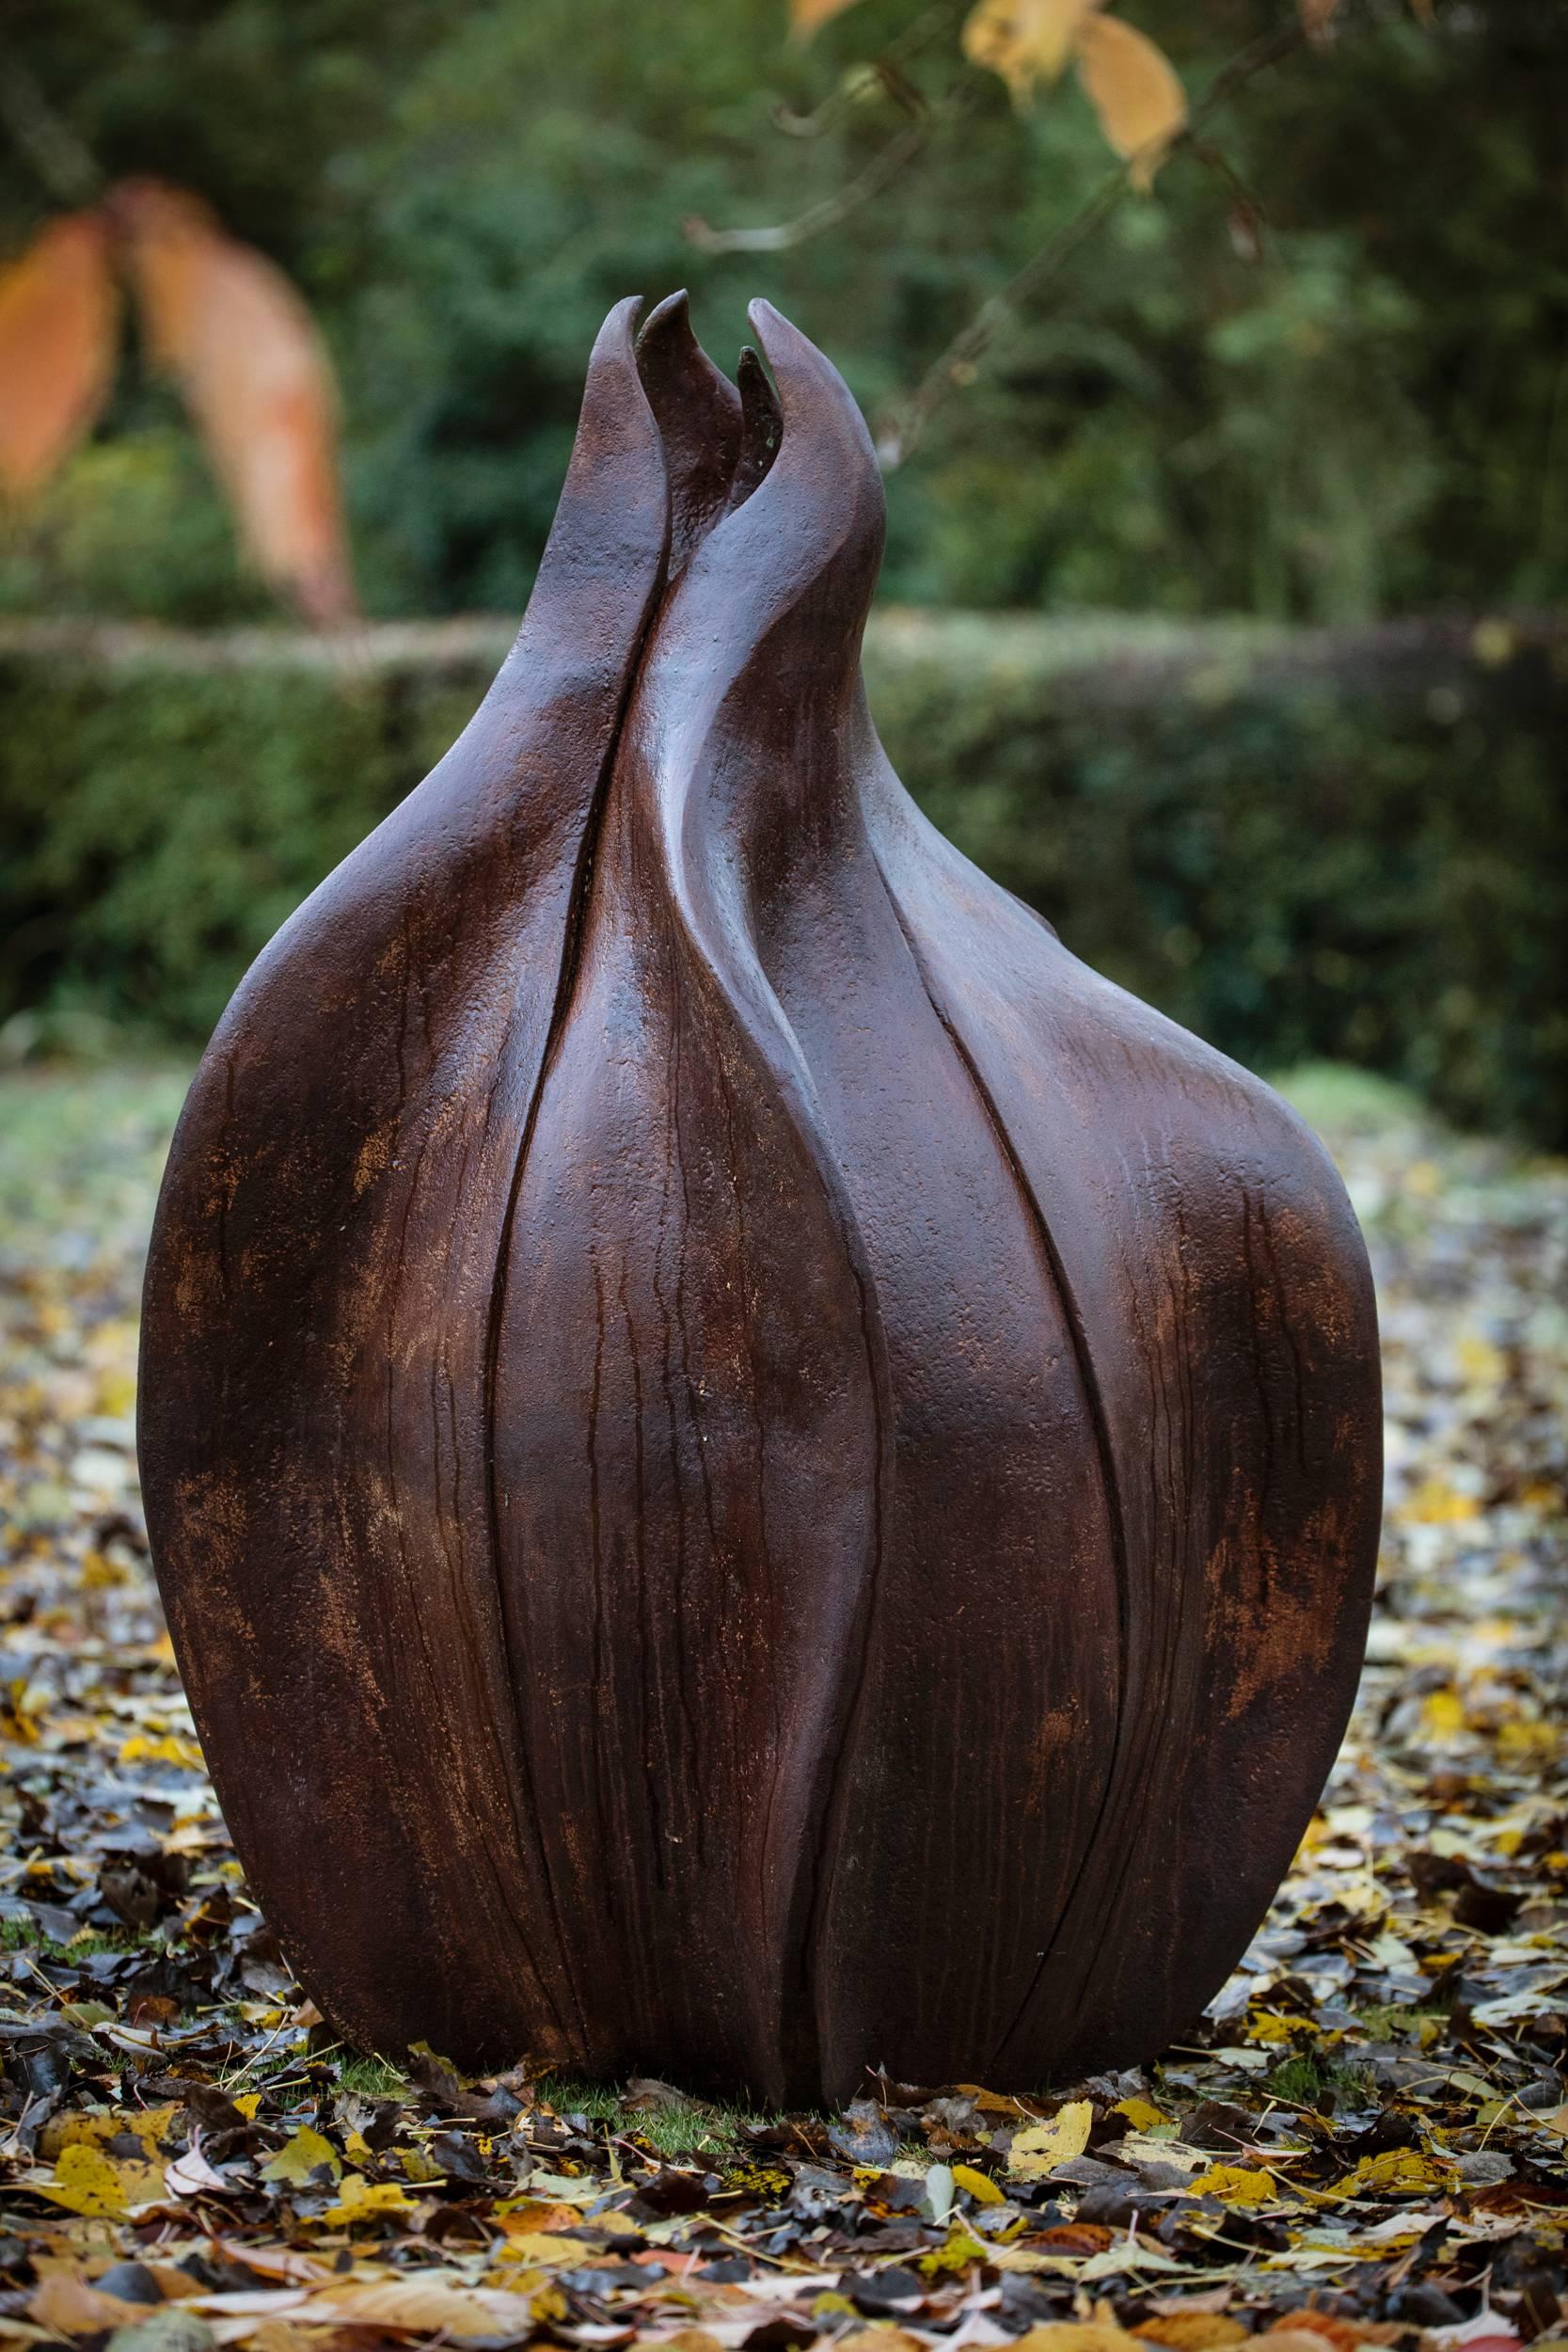 This sculpture is offered in a strictly limited edition of 9, cast either in resin or bronze (next available number is 3/9) with a resin cast taking 6 weeks to produce, bronze taking 3-4 months and price advised on request).  The image shown is of a